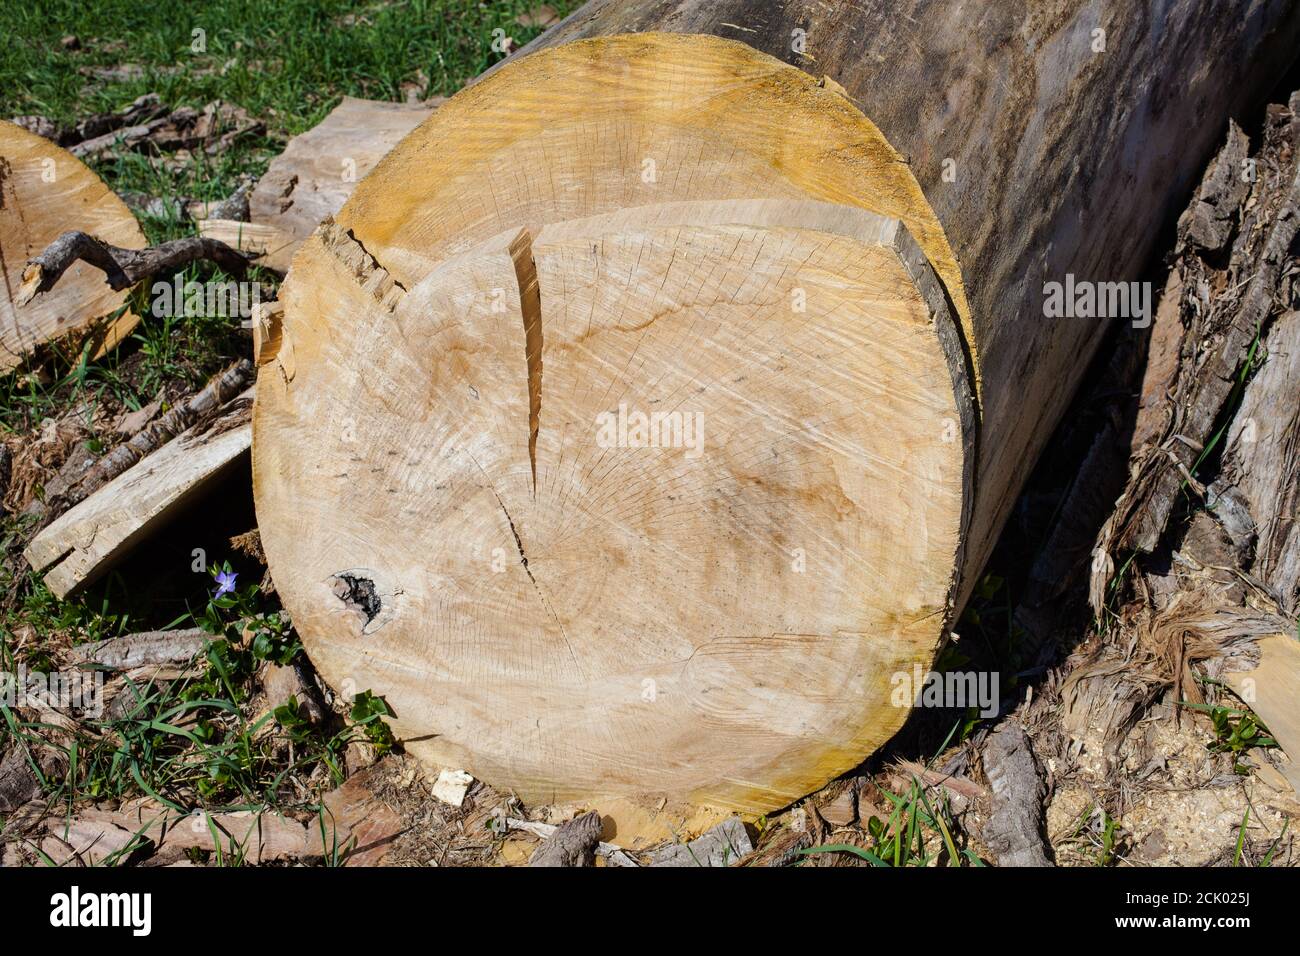 Death of a giant tree. Stock Photo